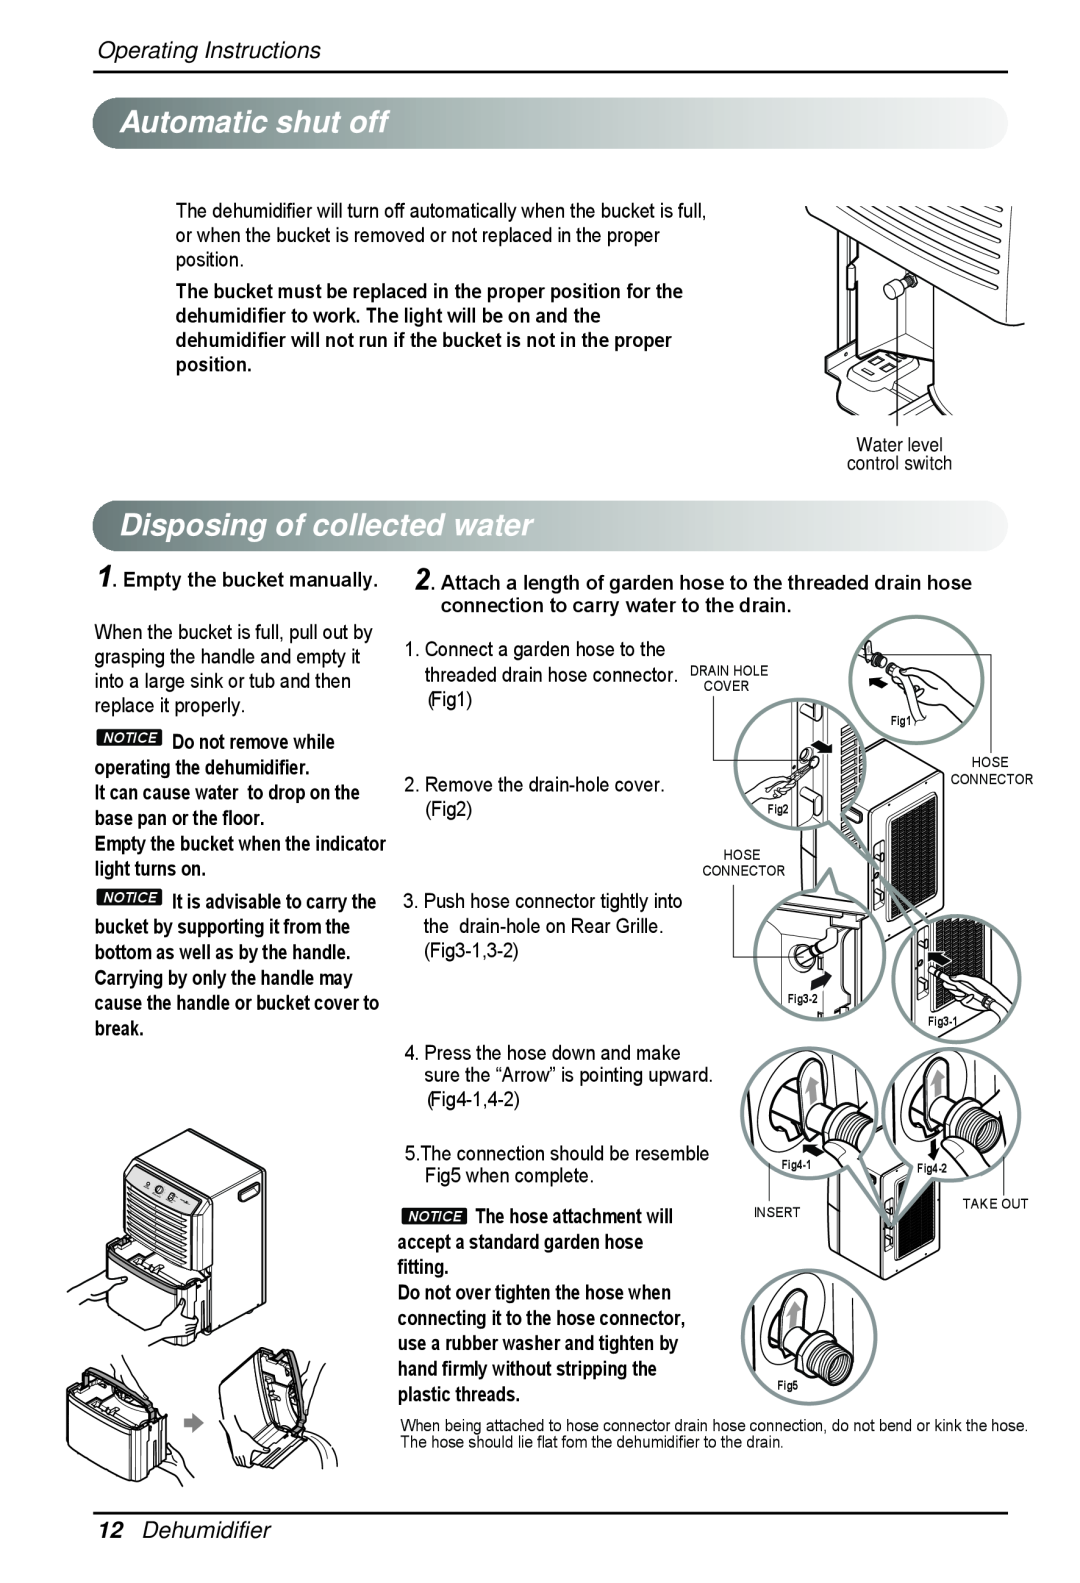 Zenith ZD309 owner manual Automaticshutoff, Disposingof collectedwater, Operating Instructions, 12Dehumidifier 